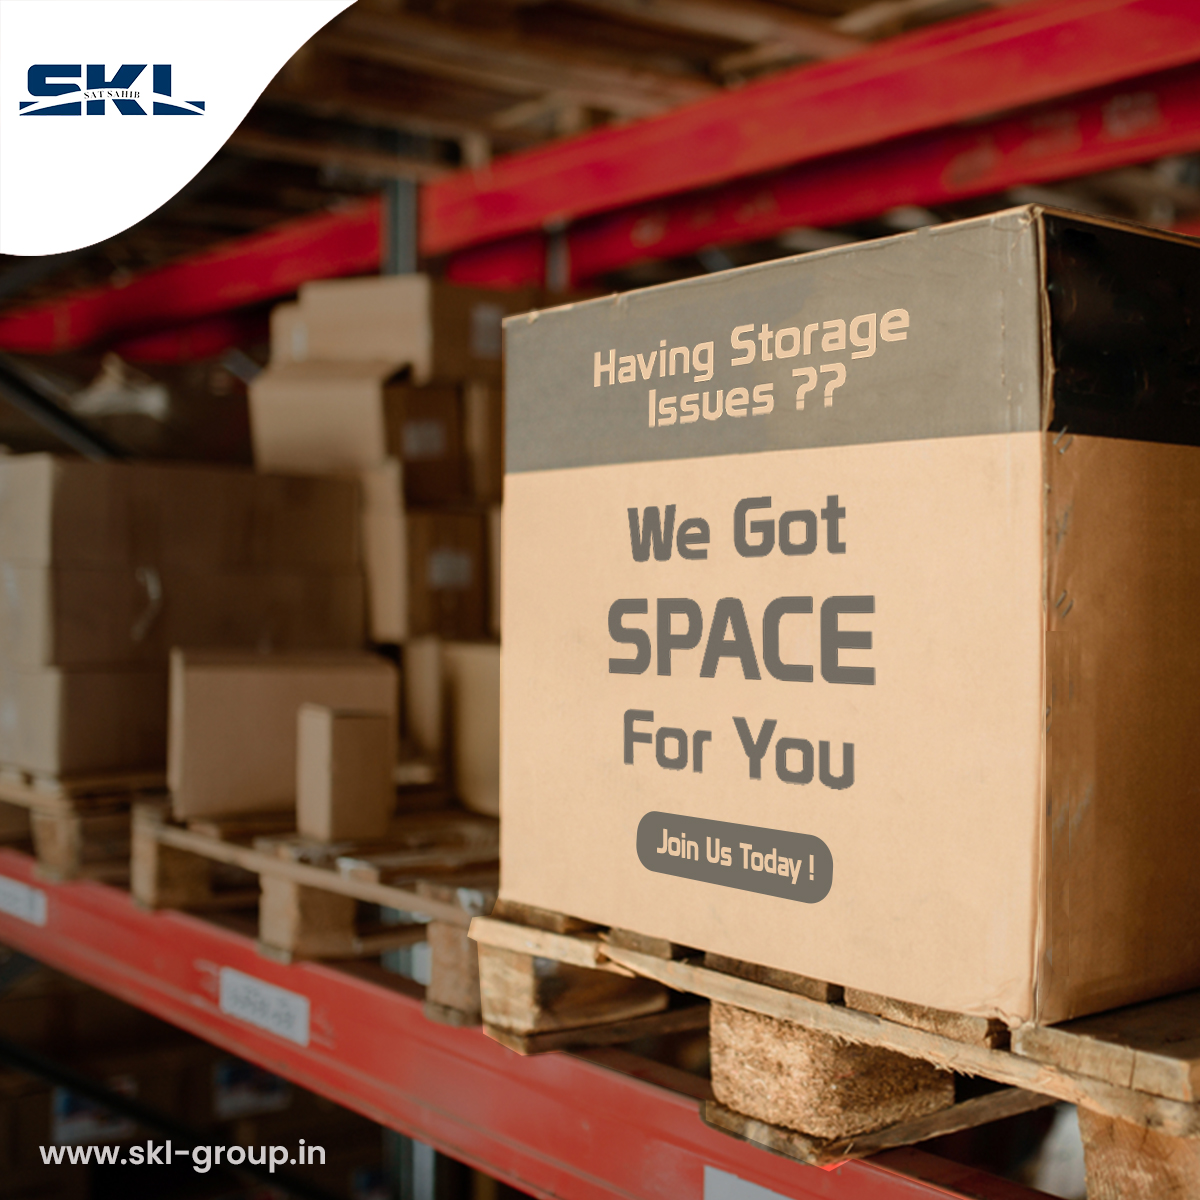 Having Storage Issue? Our warehouse has the solution! Our warehouse offers the space you need to store your goods safely and securely. With flexible leasing options and top-notch security features, you can trust us to protect your inventory.
.
#warehouse #warehousemanagement